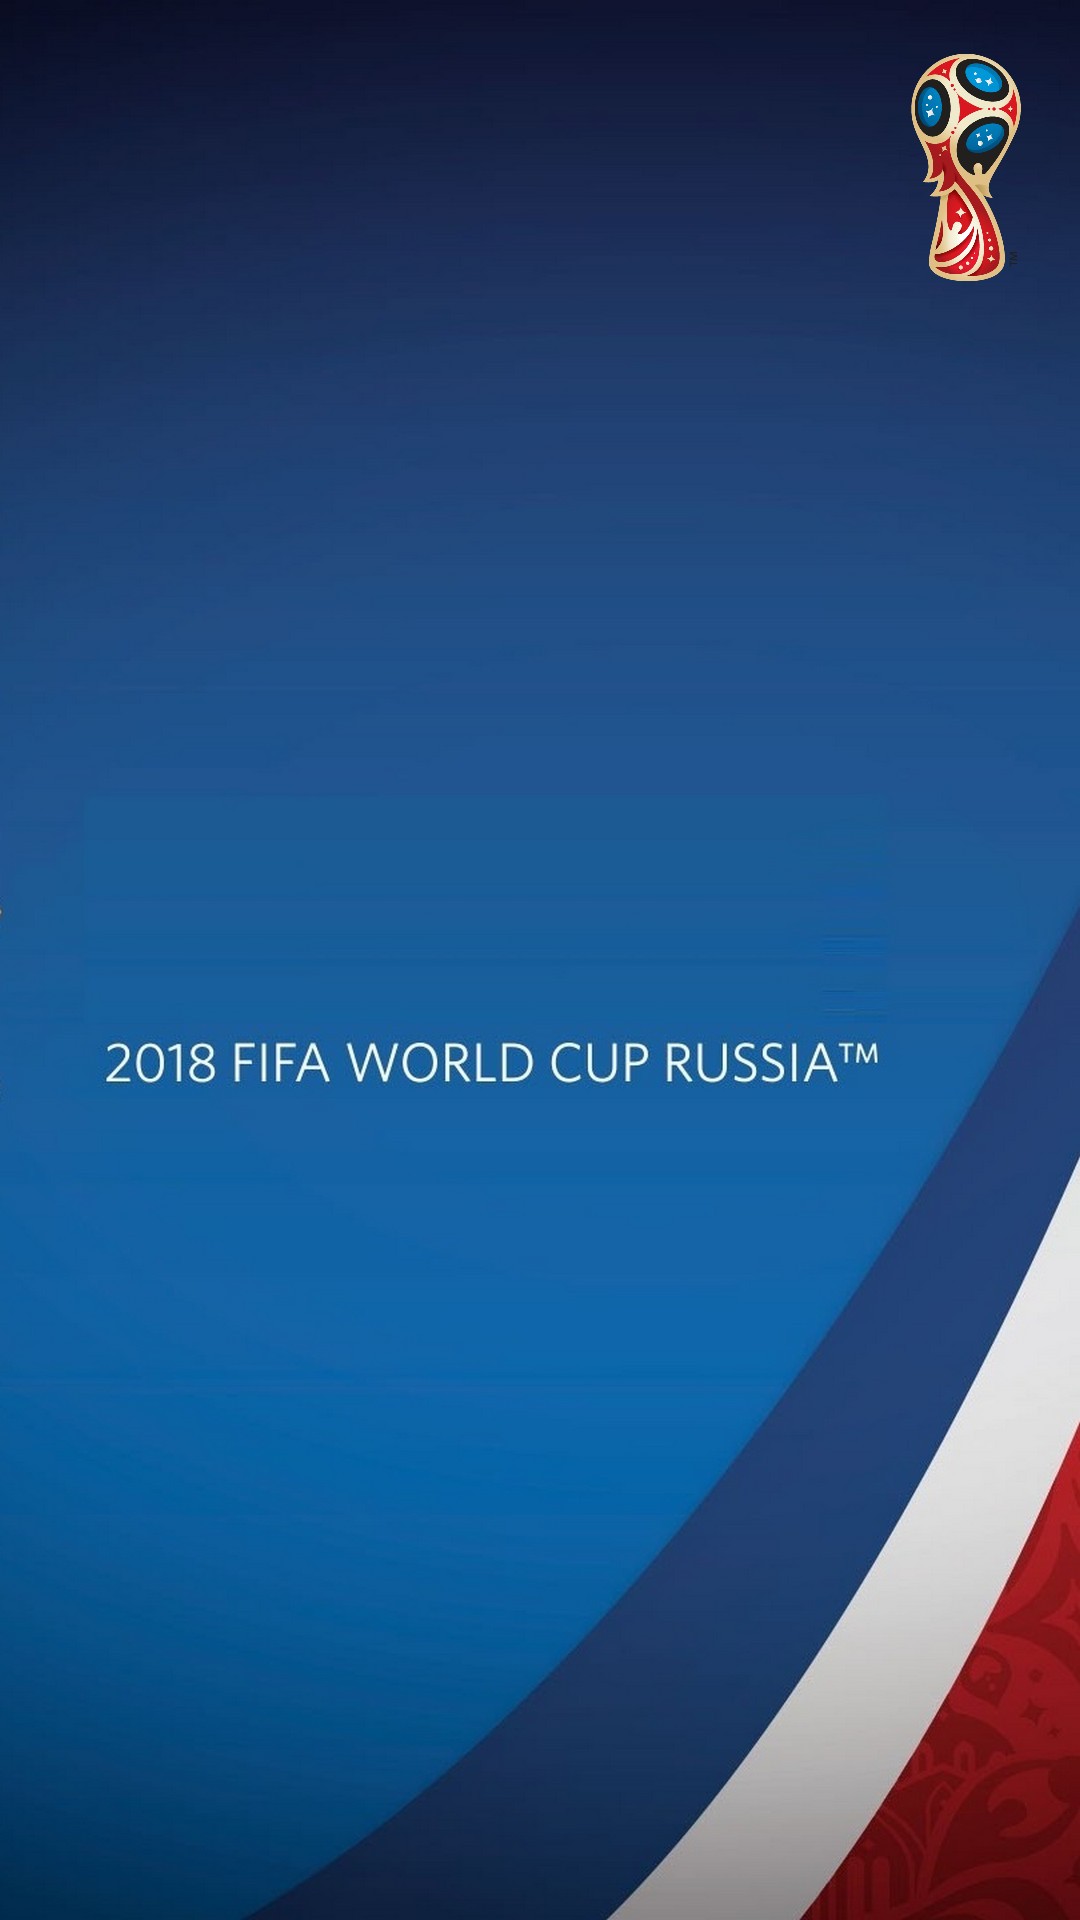 2018 World Cup Hd Wallpaper For Iphone With Resolution - 2018 Fifa World Cup - HD Wallpaper 